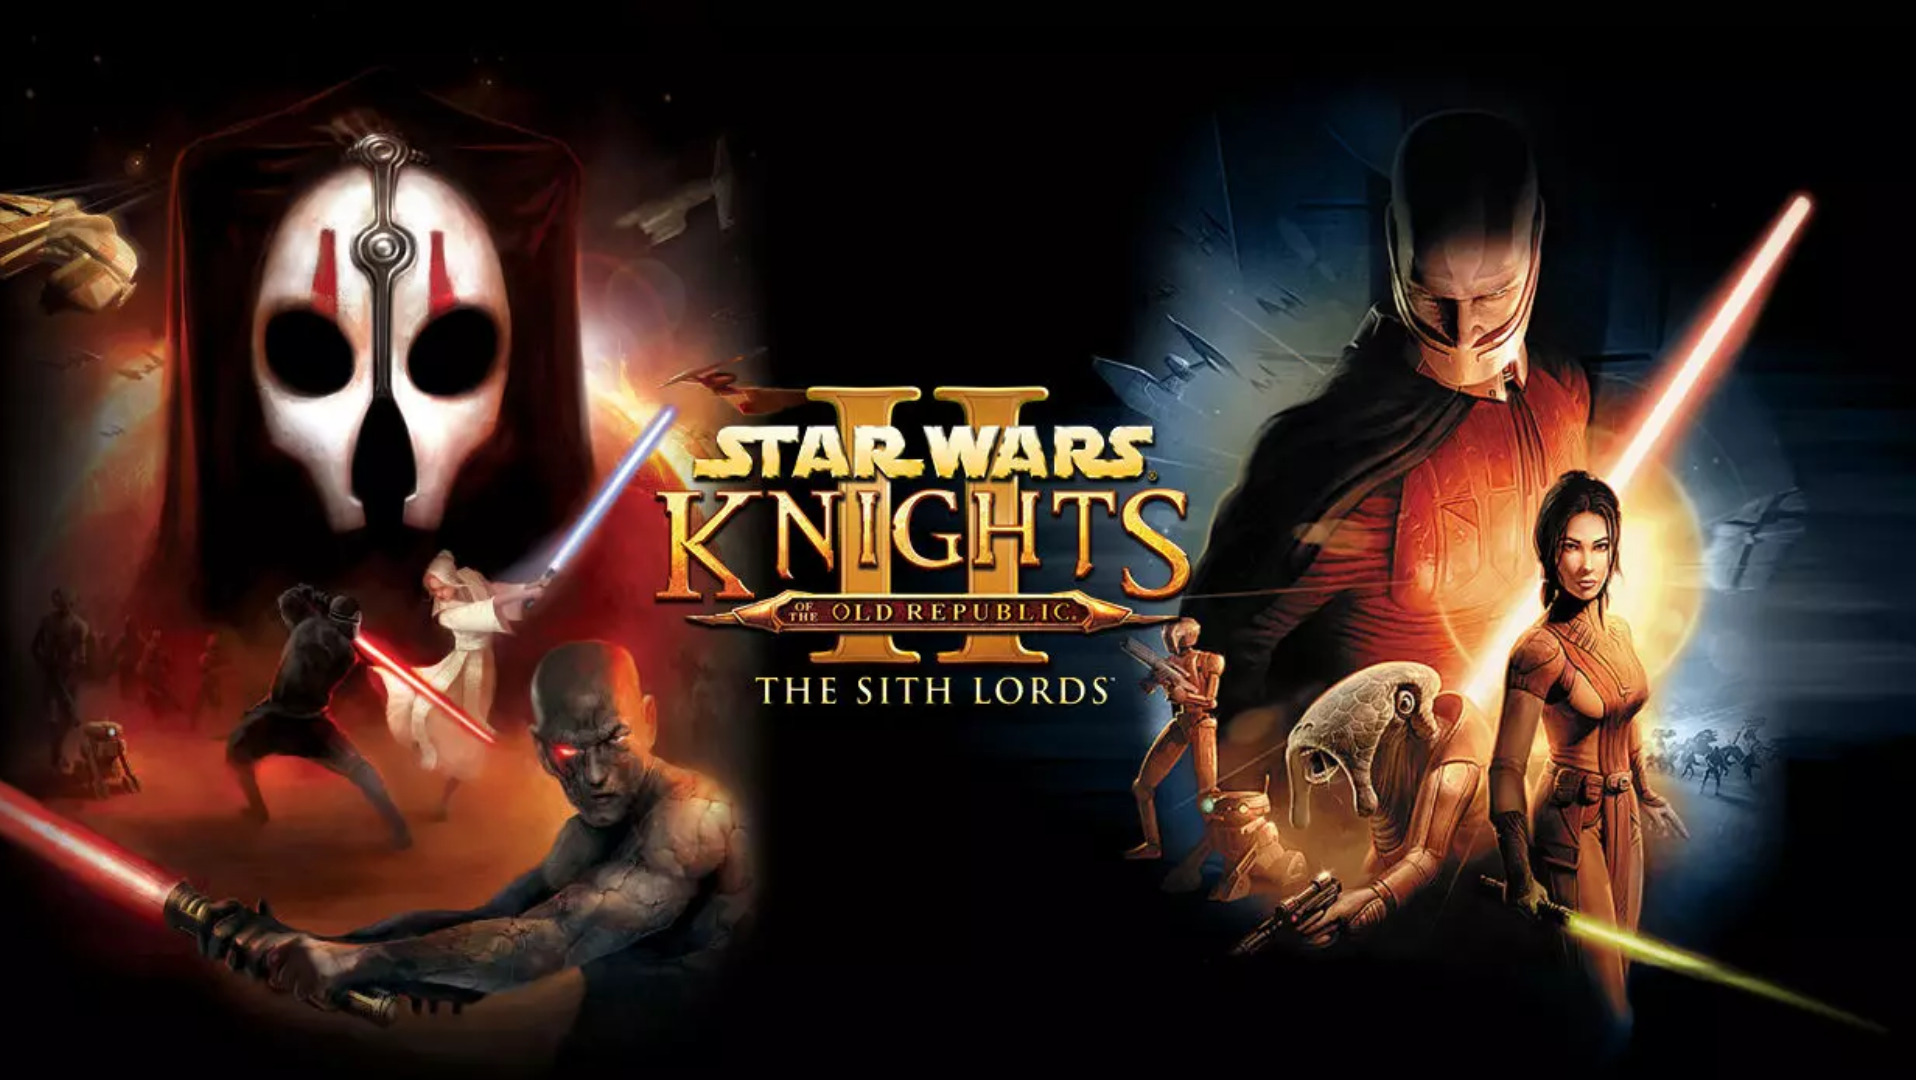 Star wars knight of the old republic 2 русификатор steam фото 57